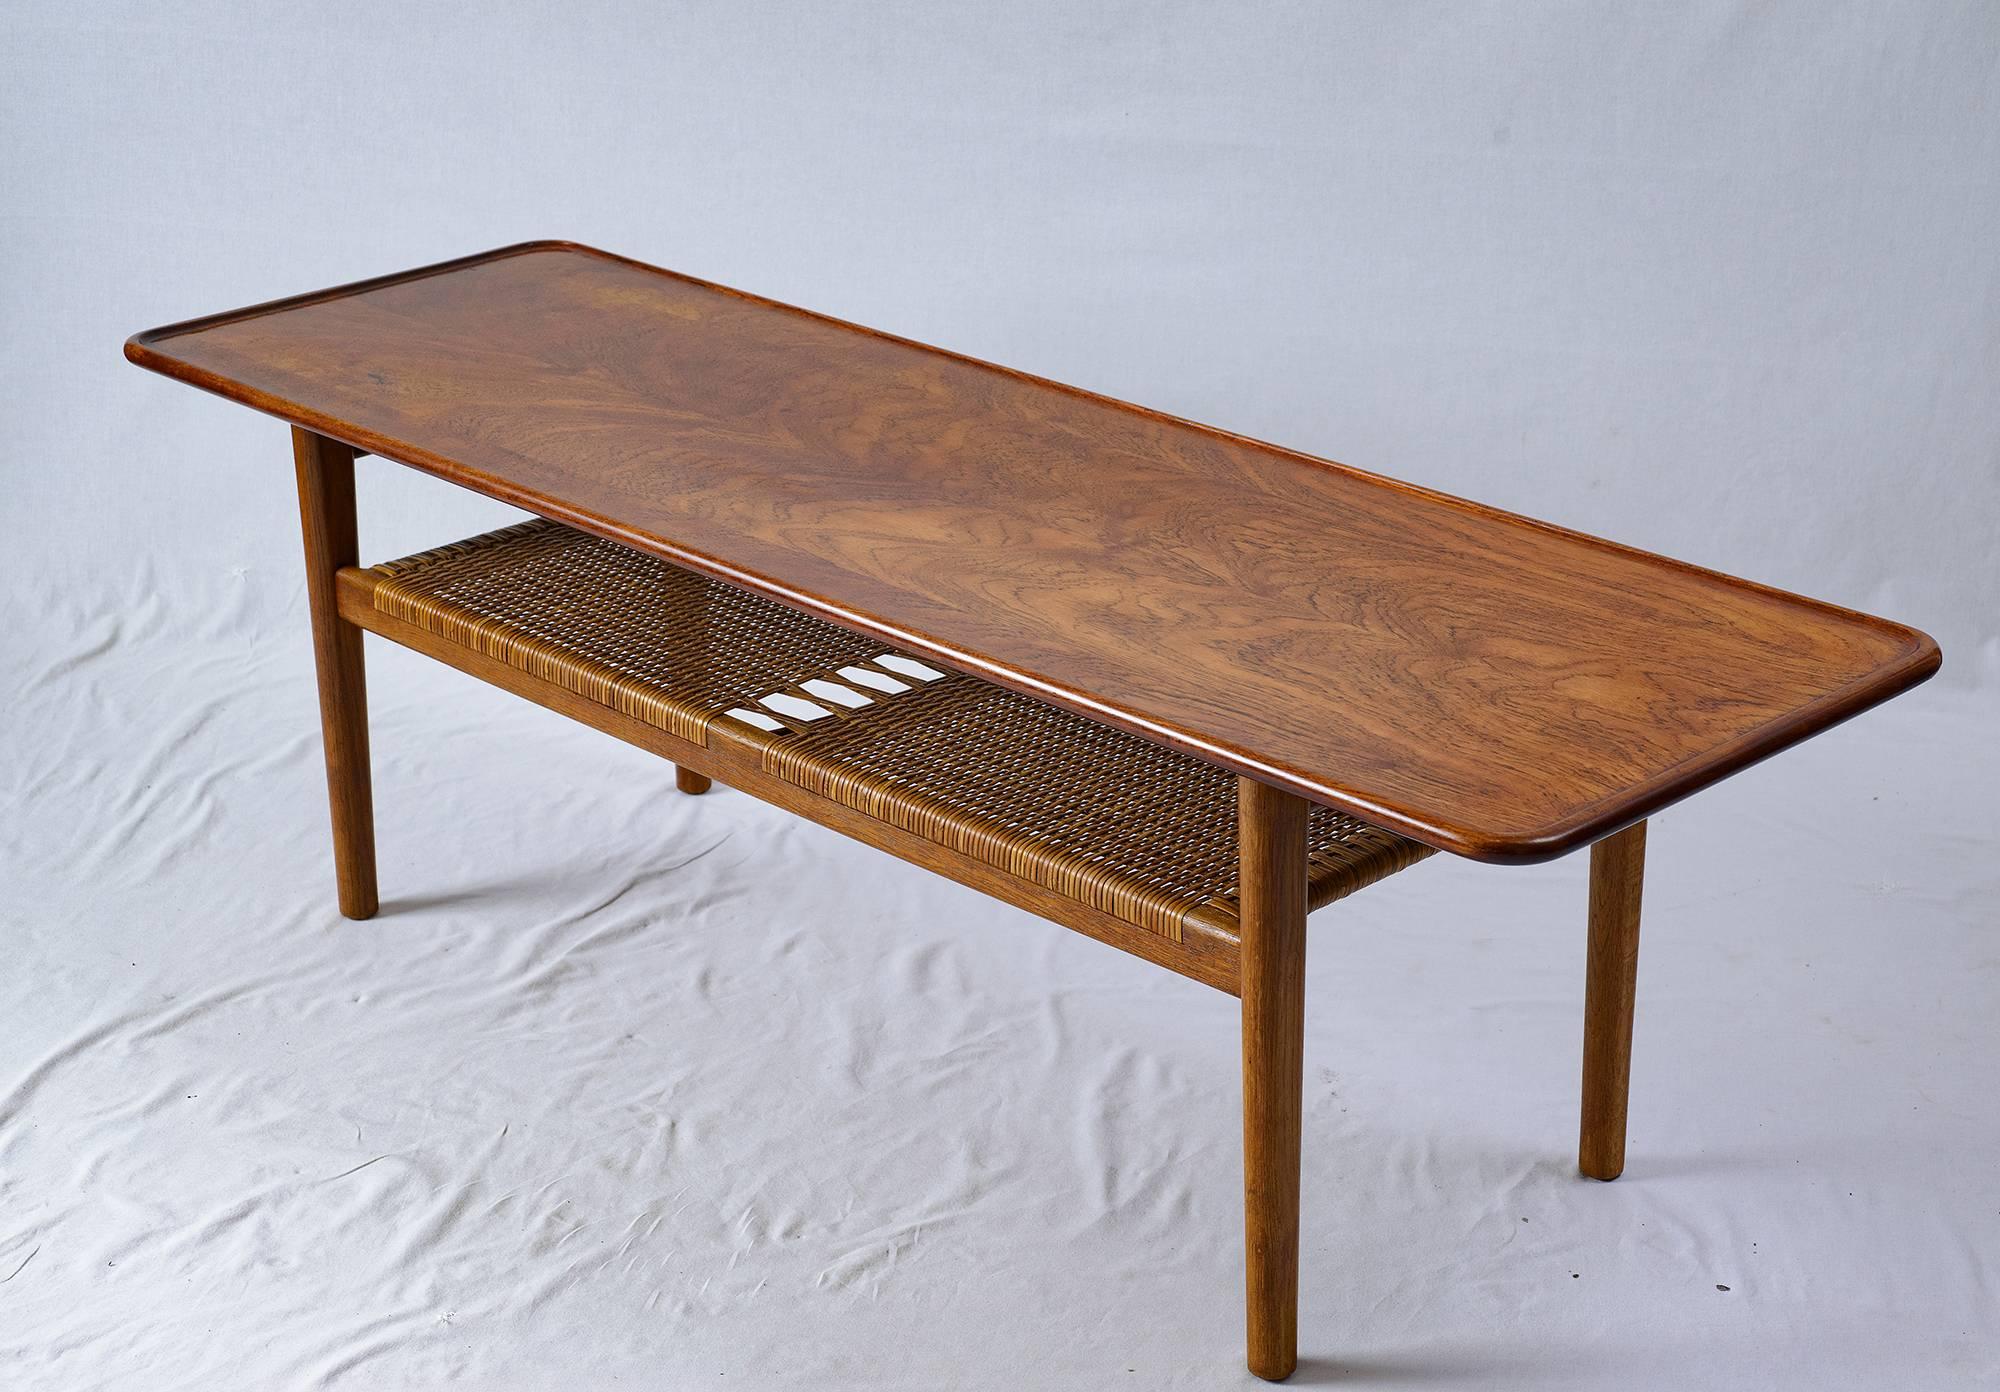 Hans Wegner AT-10 coffee table designed in 1955 and produced by Andreas Tuck.